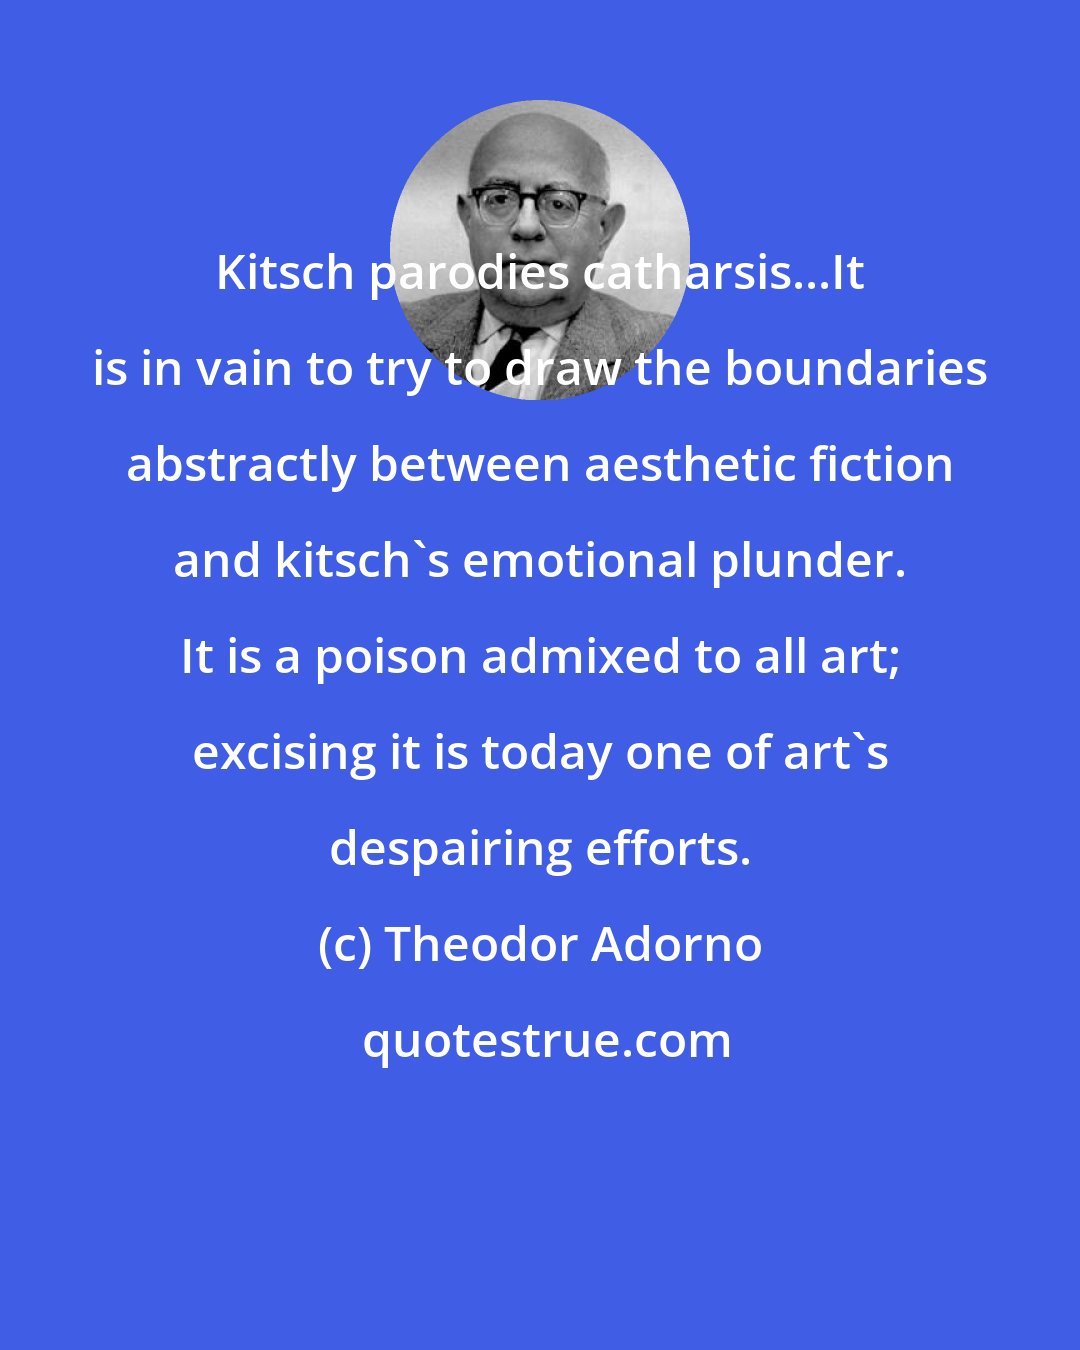 Theodor Adorno: Kitsch parodies catharsis...It is in vain to try to draw the boundaries abstractly between aesthetic fiction and kitsch's emotional plunder. It is a poison admixed to all art; excising it is today one of art's despairing efforts.